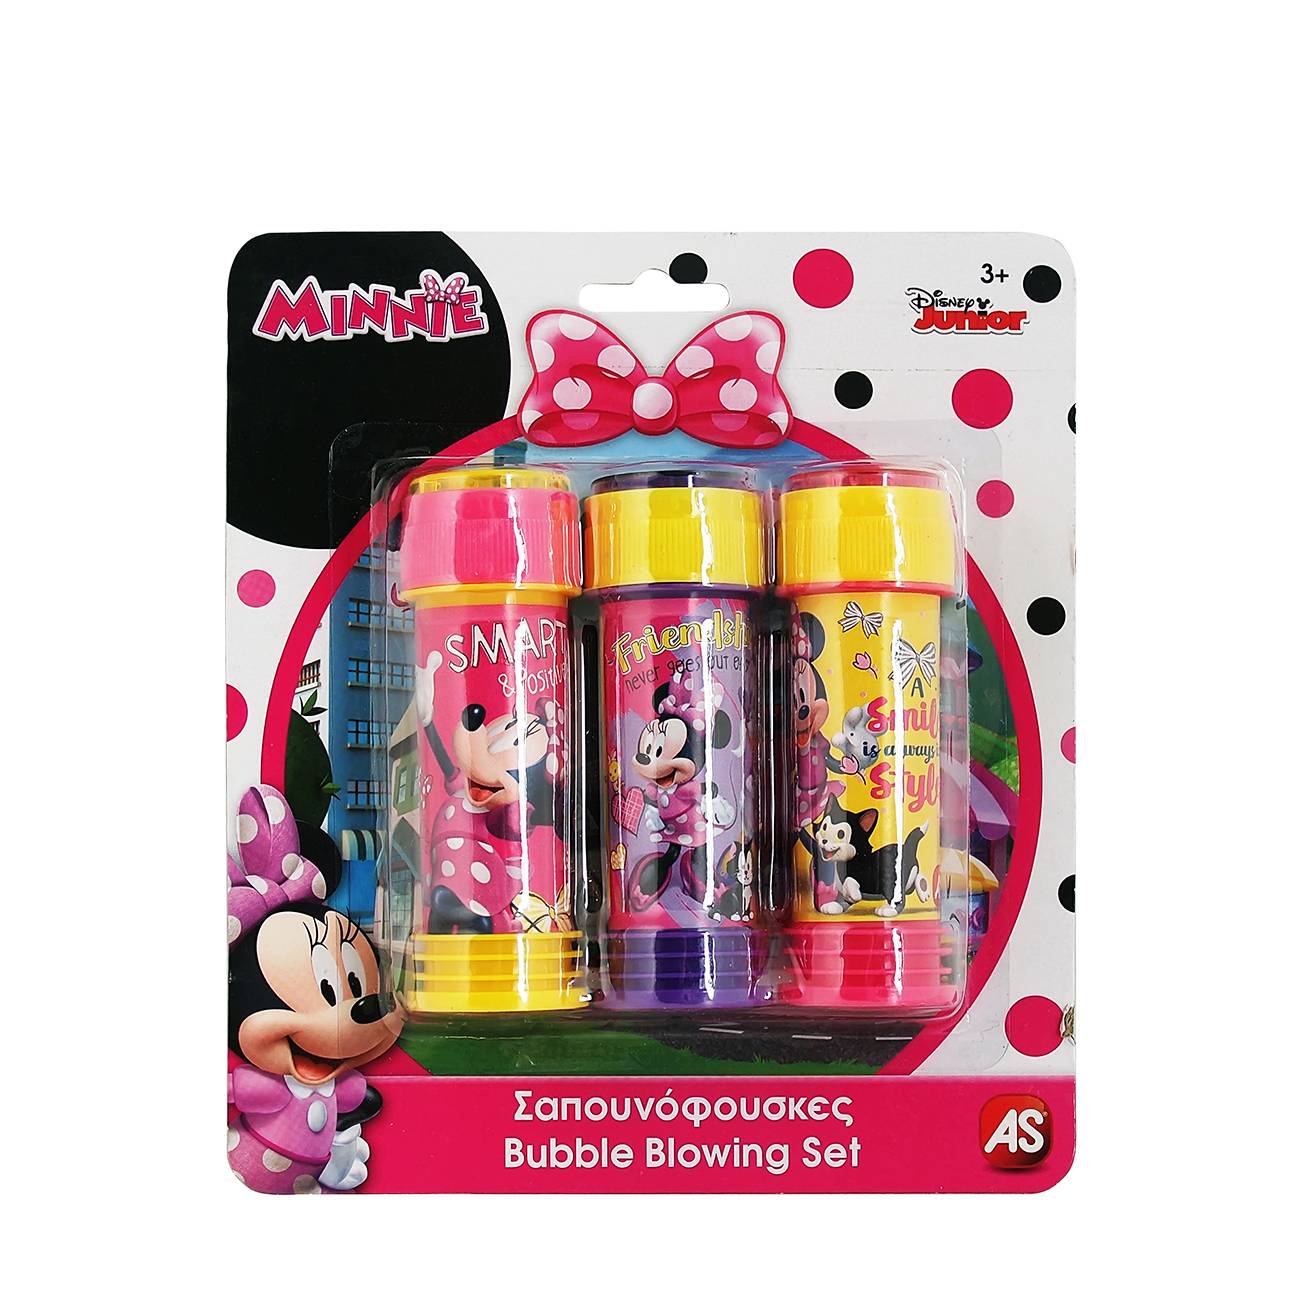 MINNIE BUBBLE BLOWING SET AS